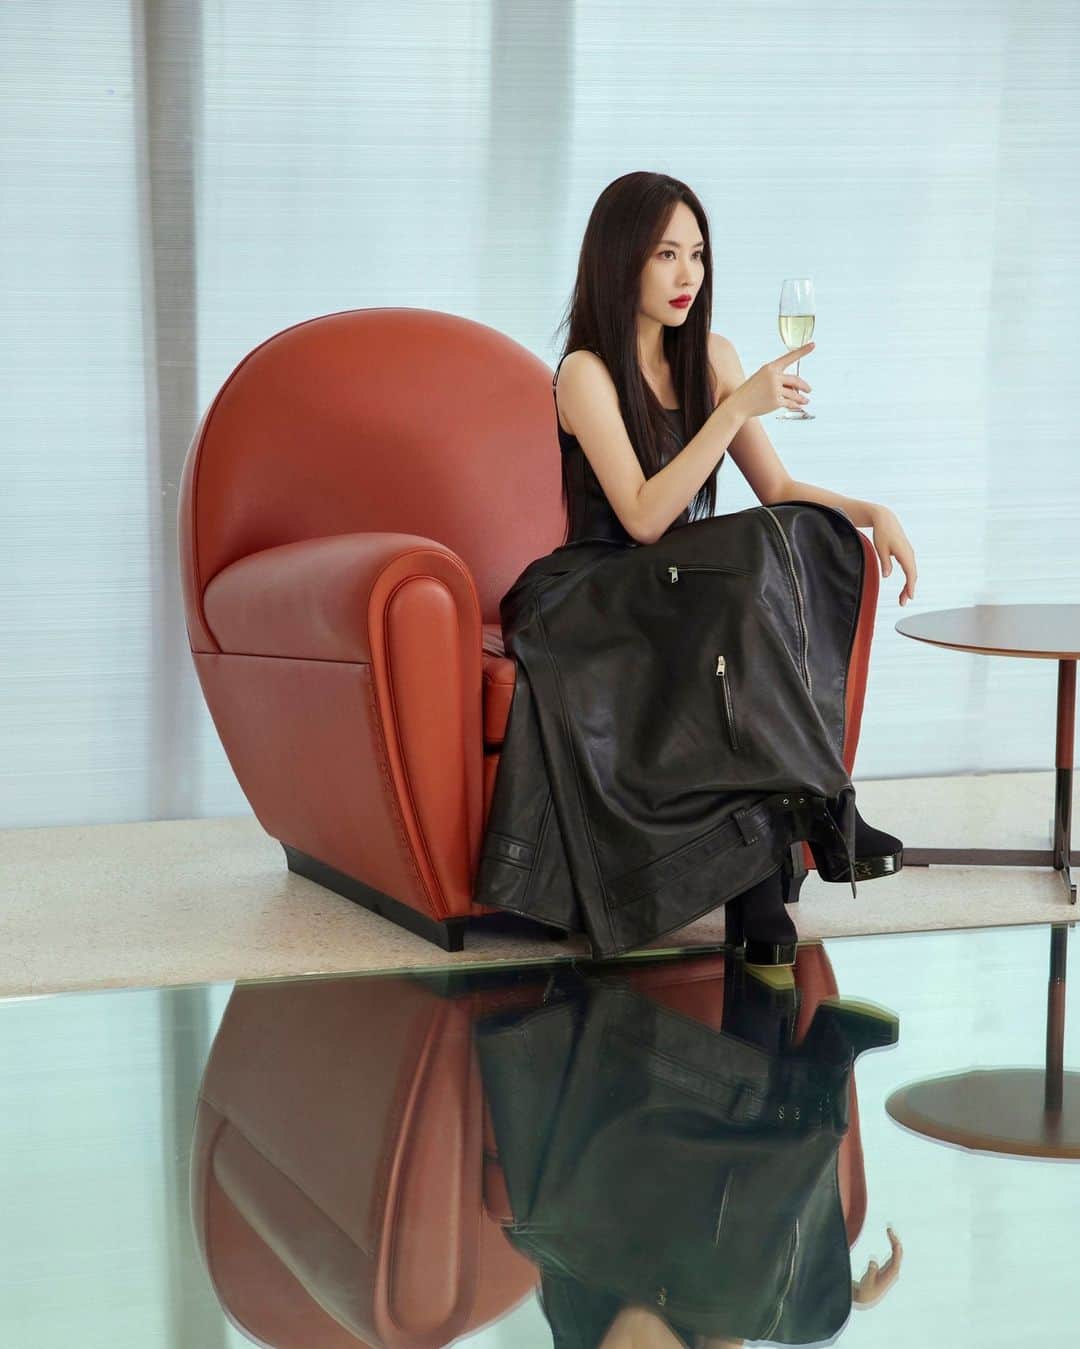 Poltrona Frauのインスタグラム：「When it was created in 1930, the Vanity Fair armchair was a new kind of armchair, perfectly suited to accommodate the demands of modern life. Today we celebrate its timelessness thanks to a novel collaboration with @glassmagazine_china. The influence of the past meets today’s influencers in these striking photographs featuring @ff0427 and @nz0502. Let’s raise our glass!   #PoltronaFrau #GLASSmagazine #RenzoFrau」